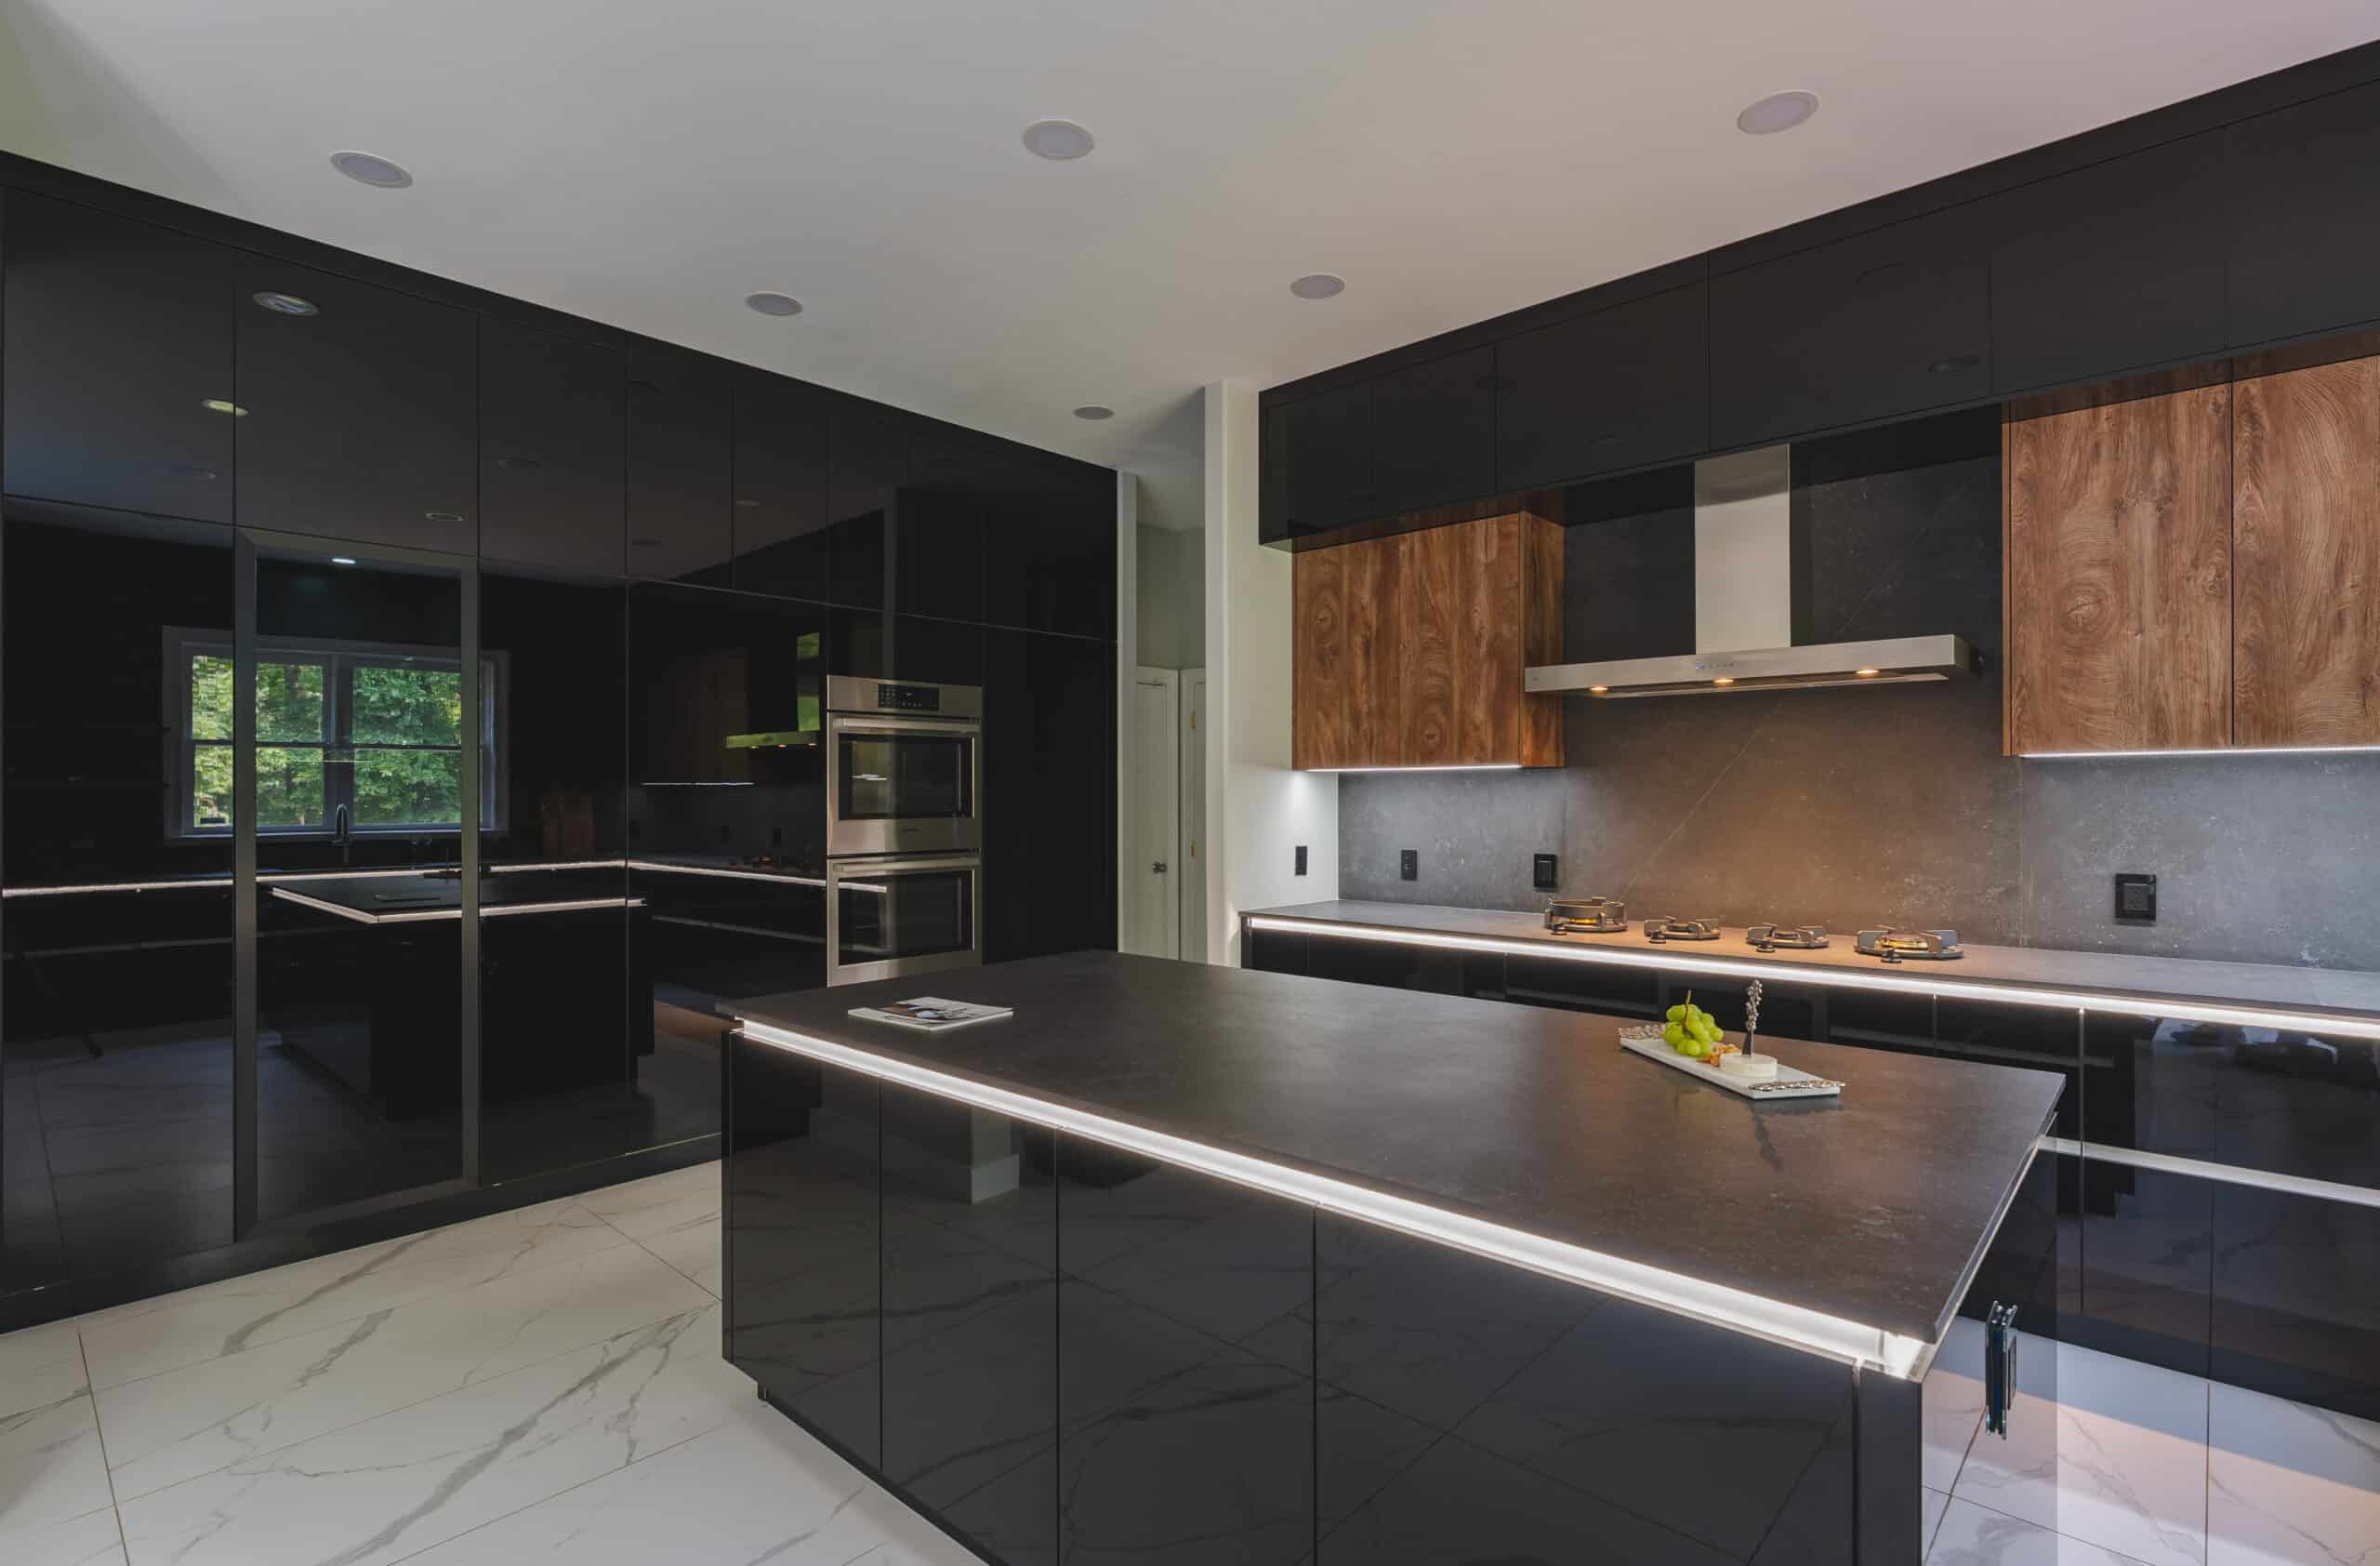 A contemporary kitchen featuring sleek black and black countertops